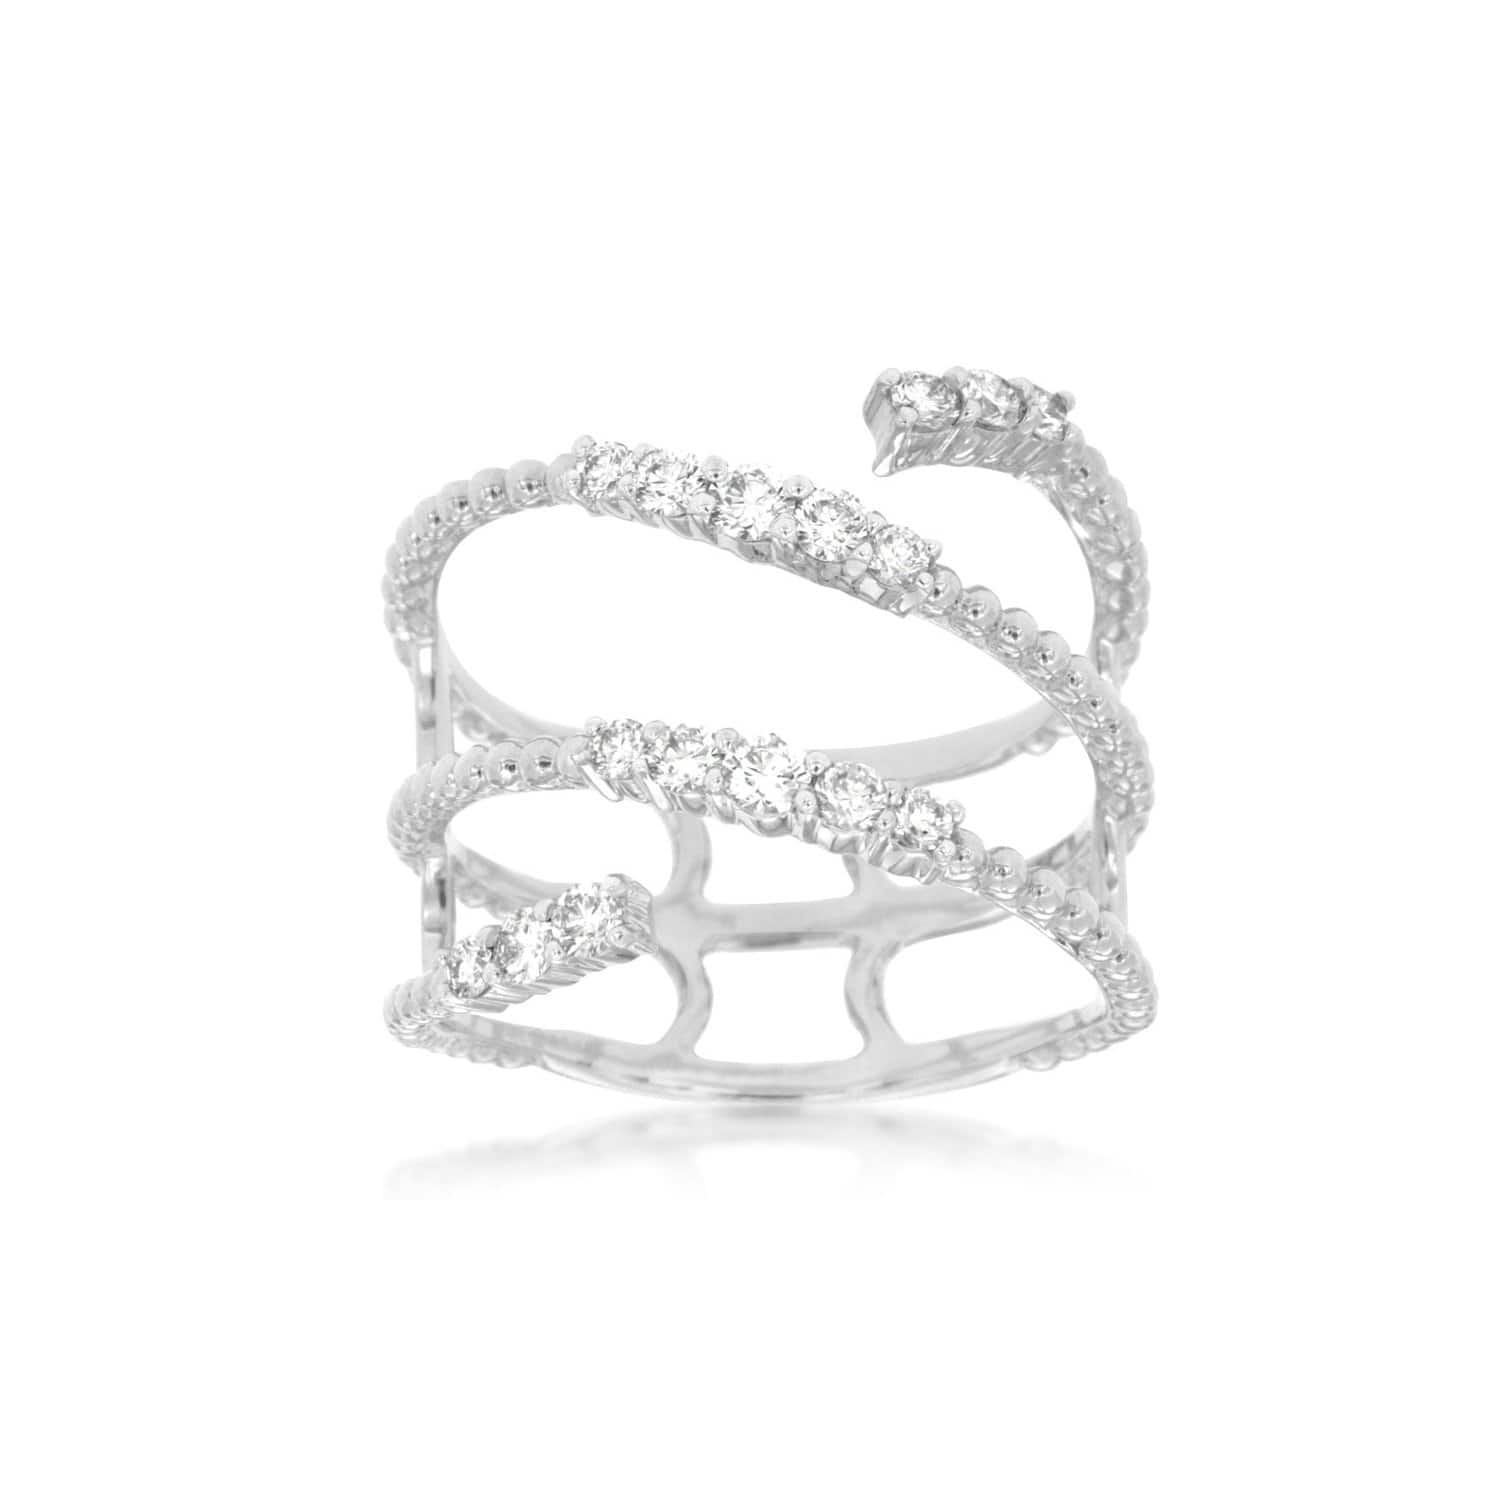 The 14ct White Gold Loop Ring